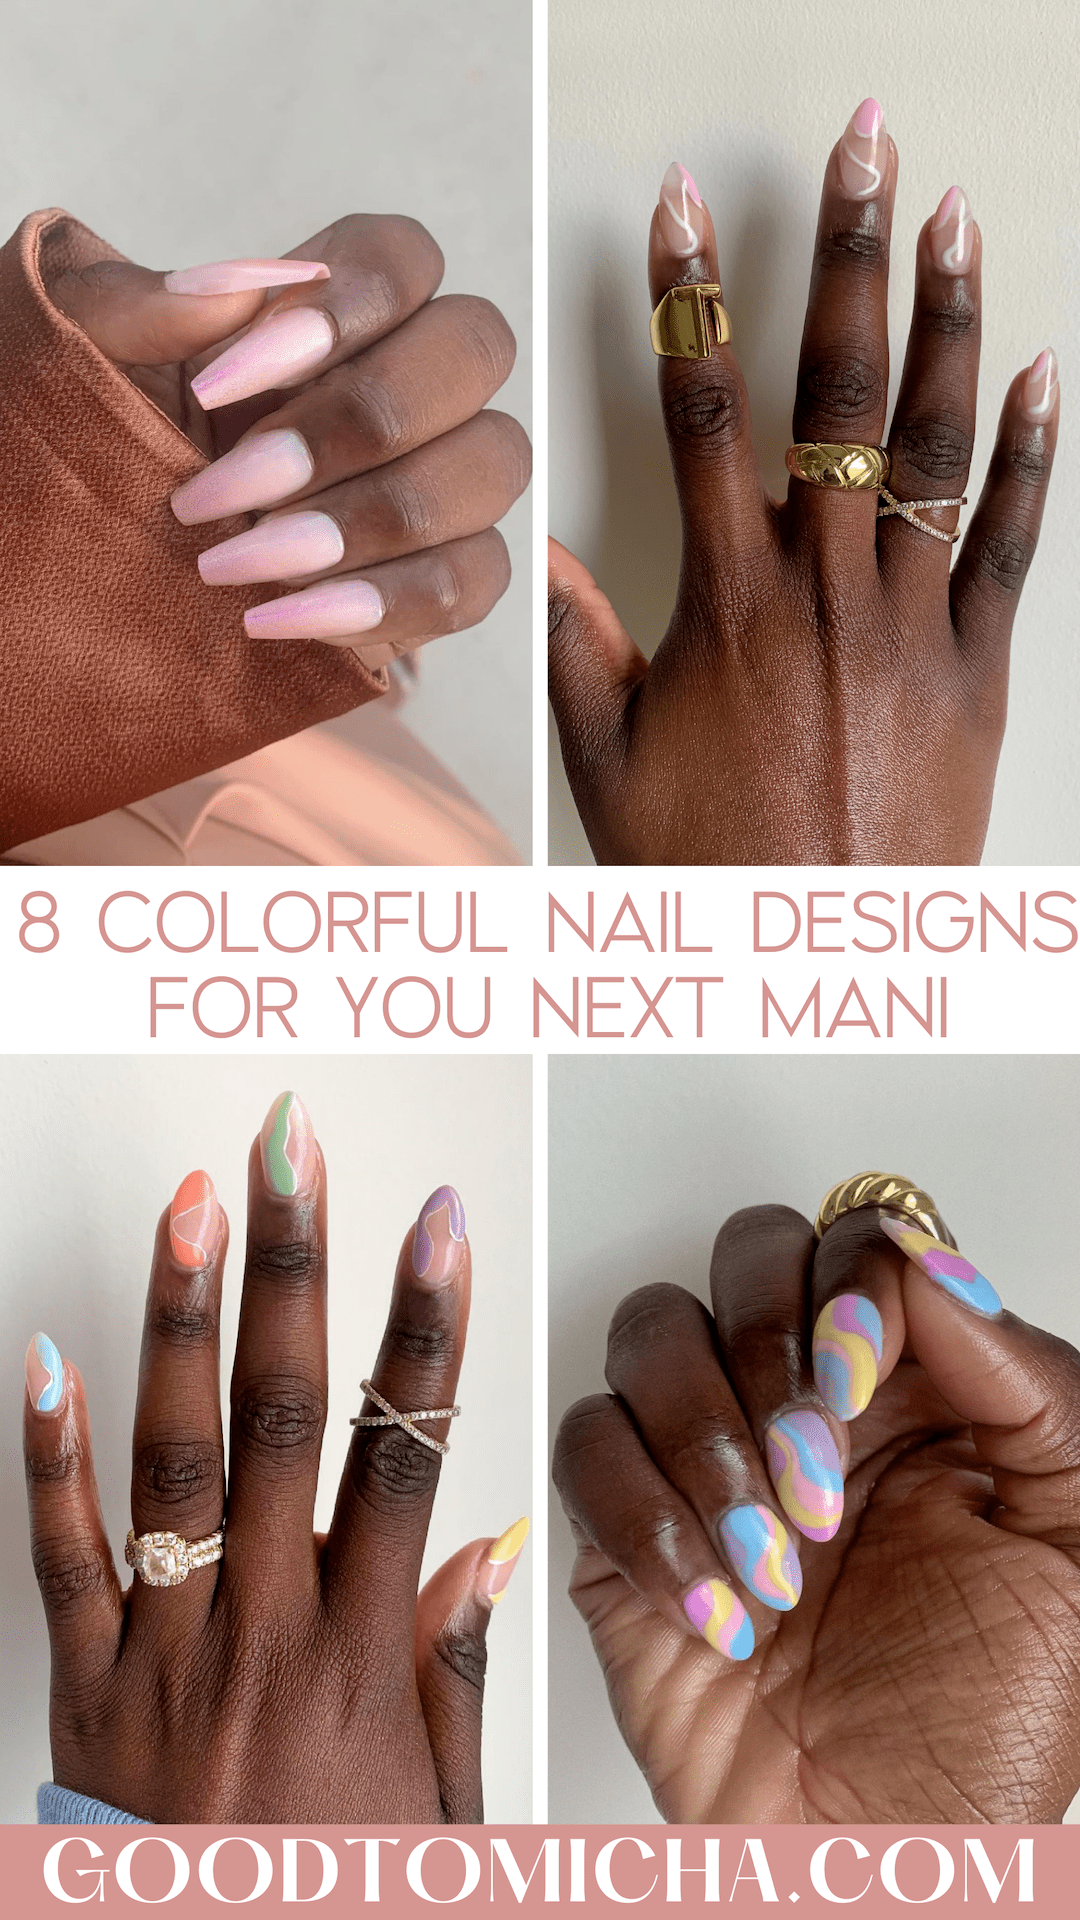 The biggest trends in colorful nail designs this year | GoodTomiCha.com